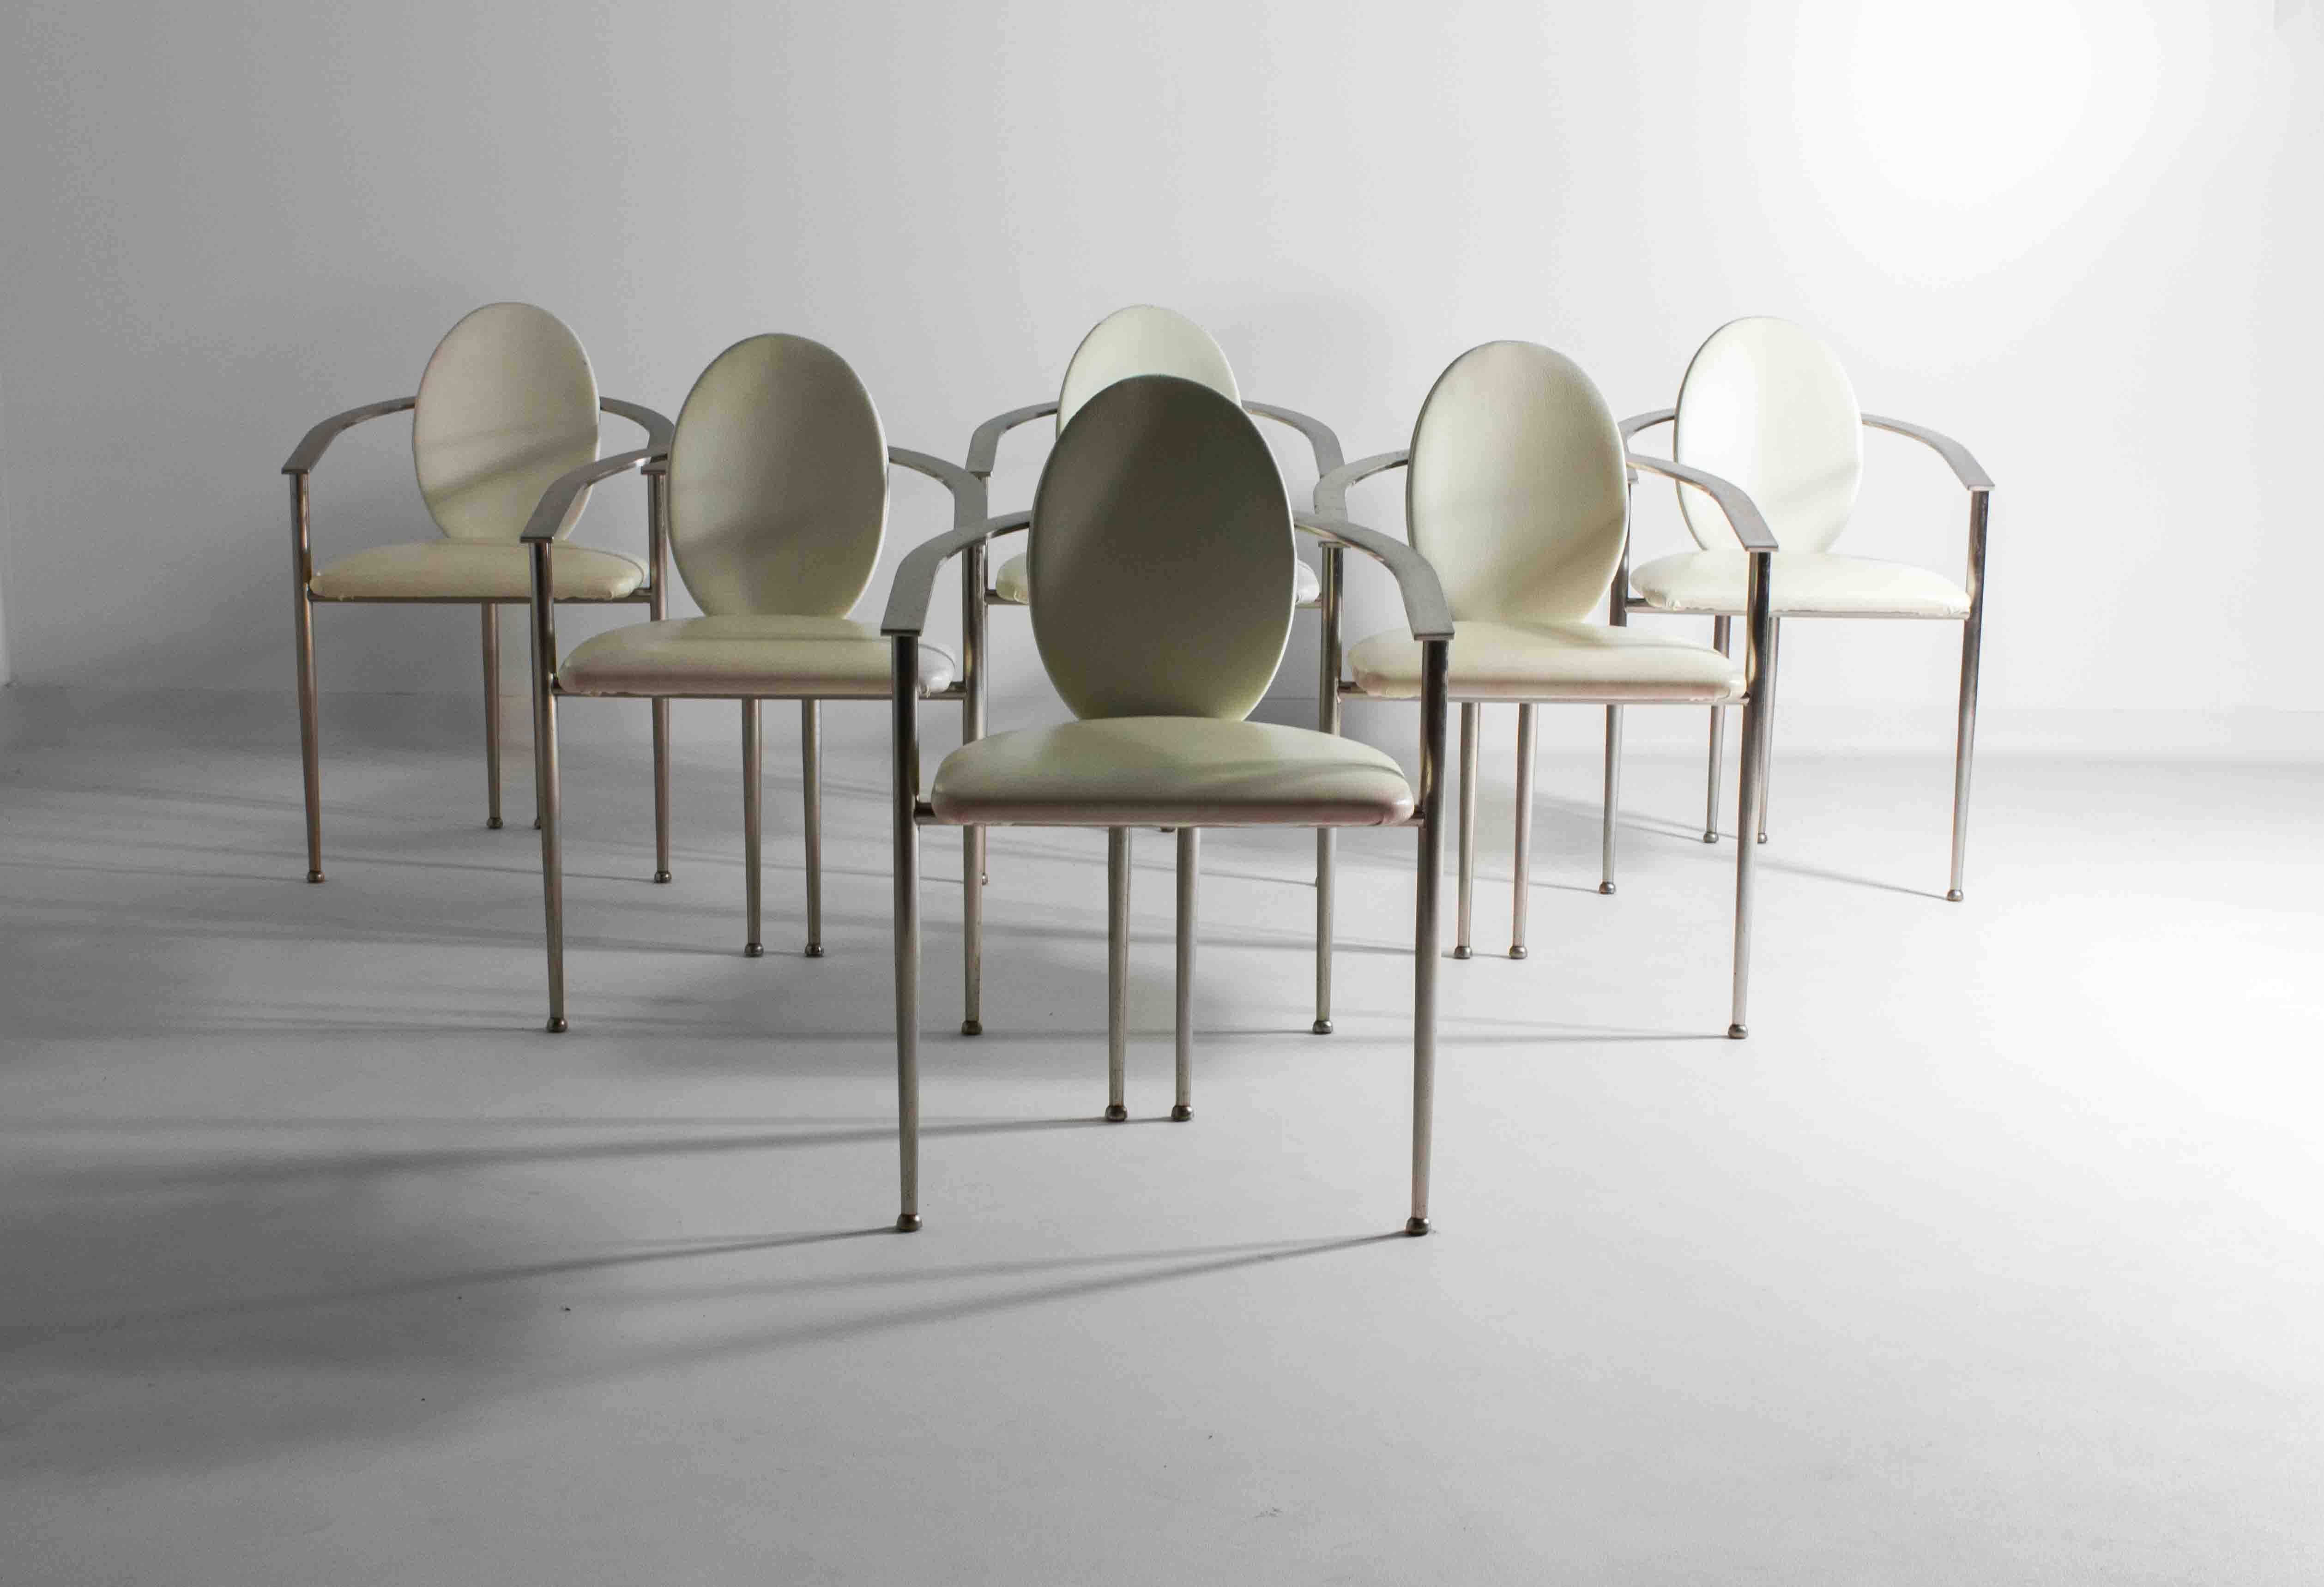 A unique set of six postmodern dining chairs by Belgochrom from the 80s upholstered in white leather and supported by a brushed steel frame. These heavy chairs perfectly blend style and functionality, and will withstand the test of time for many